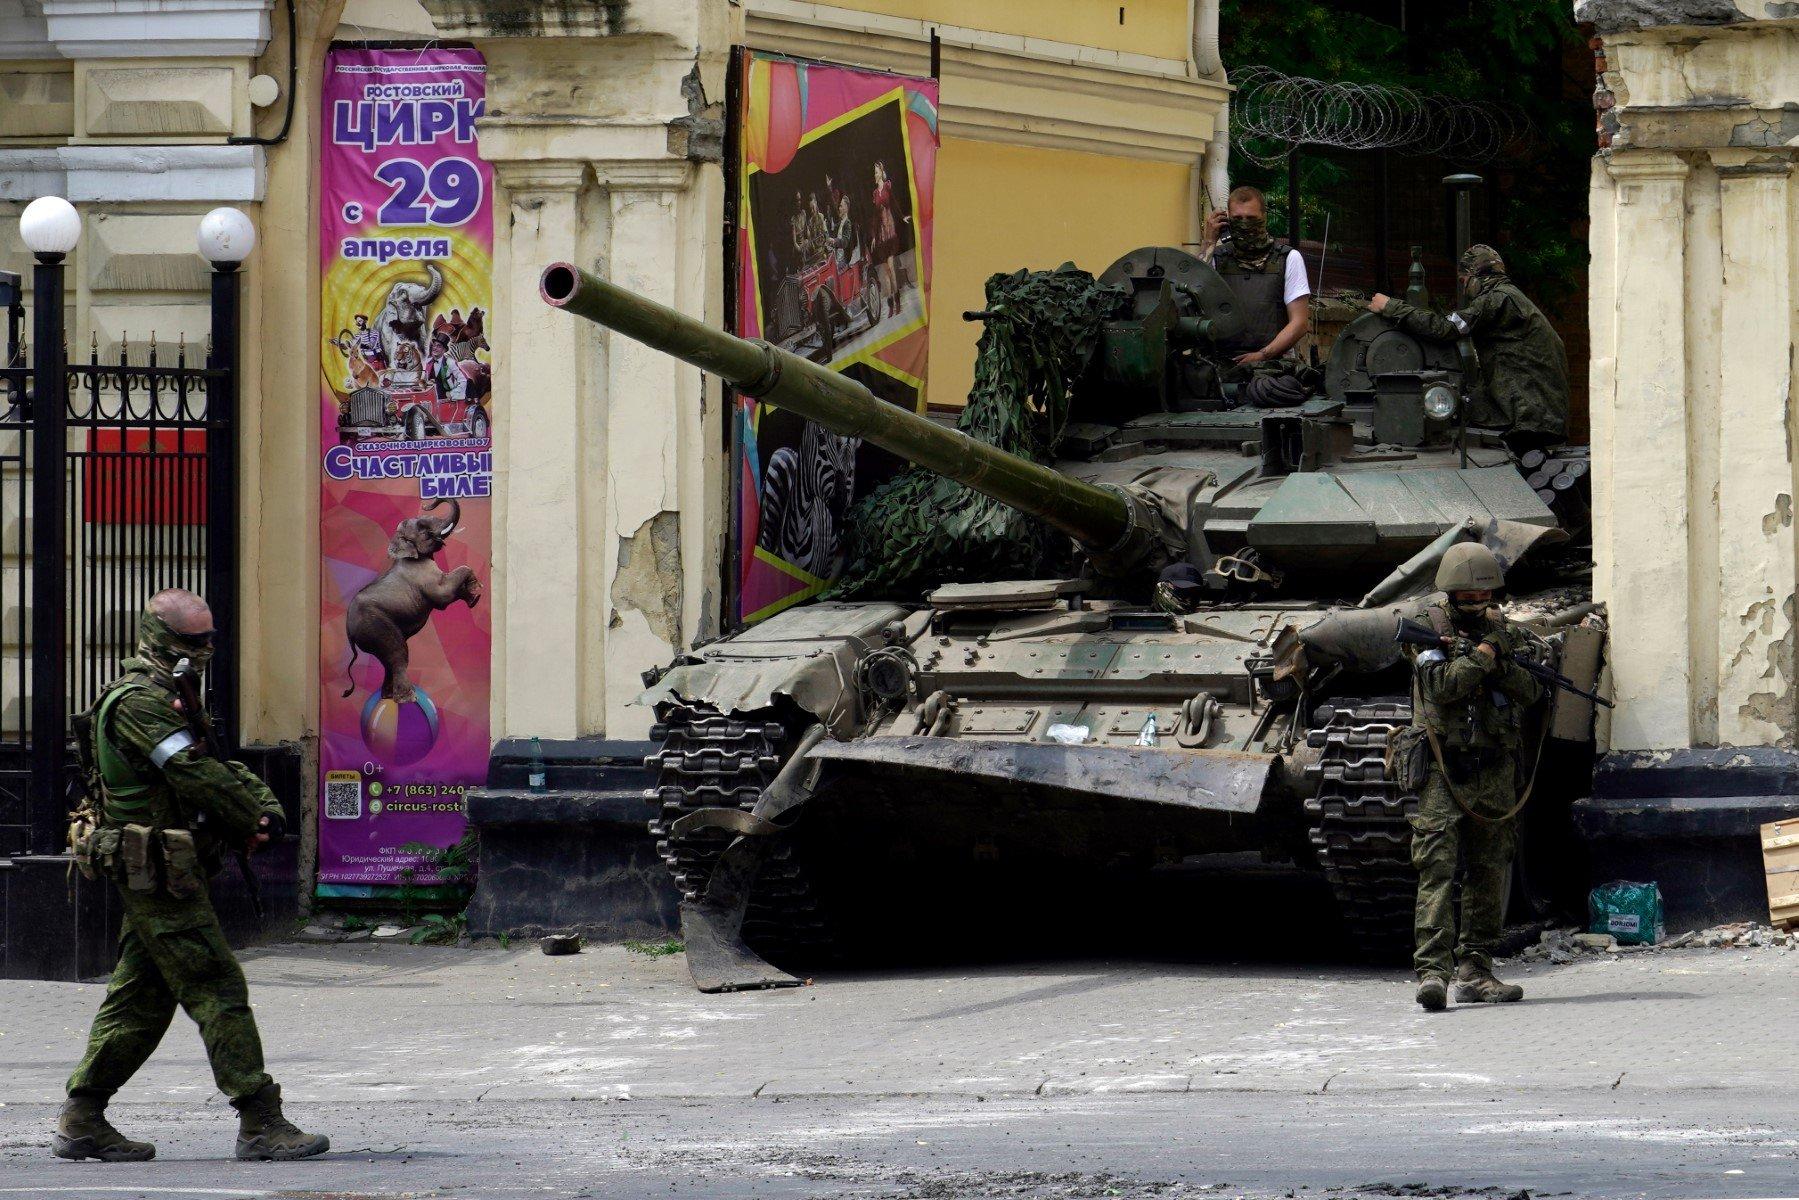 Members of Wagner group patrol in an area near a tank outside a circus building in the city of Rostov-on-Don, on June 24, 2023. - President Vladimir Putin on June 24, 2023 said an armed mutiny by Wagner mercenaries was a "stab in the back" and that the group's chief Yevgeny Prigozhin had betrayed Russia, as he vowed to punish the dissidents. Prigozhin said his fighters control key military sites in the southern city of Rostov-on-Don. (Photo by STRINGER / AFP)